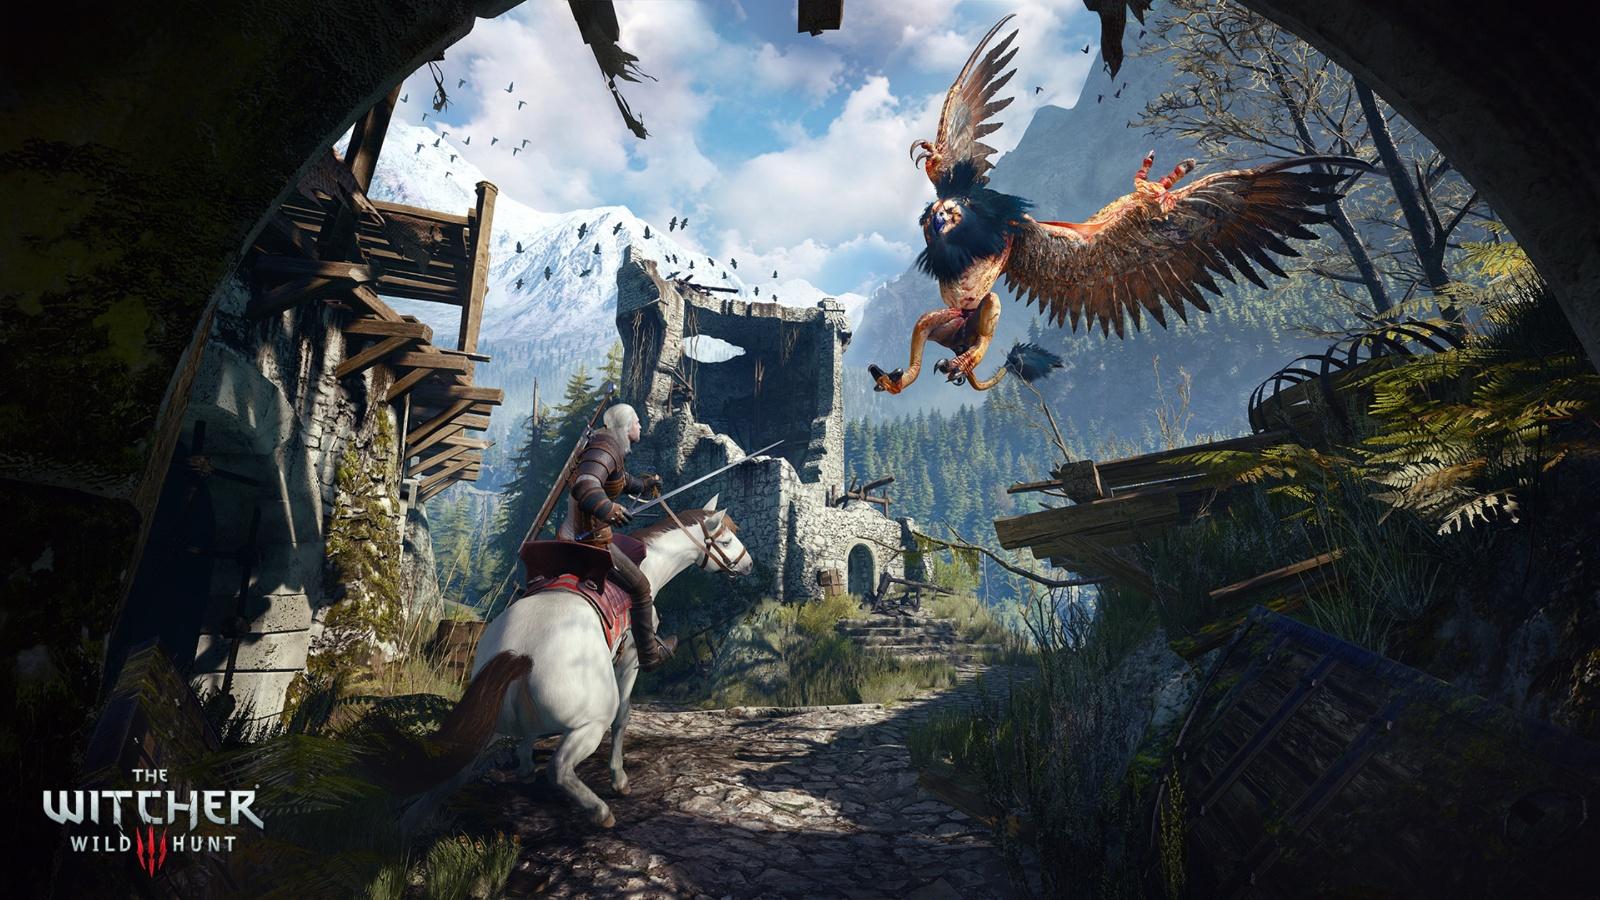 A screenshot from the game Witcher 3